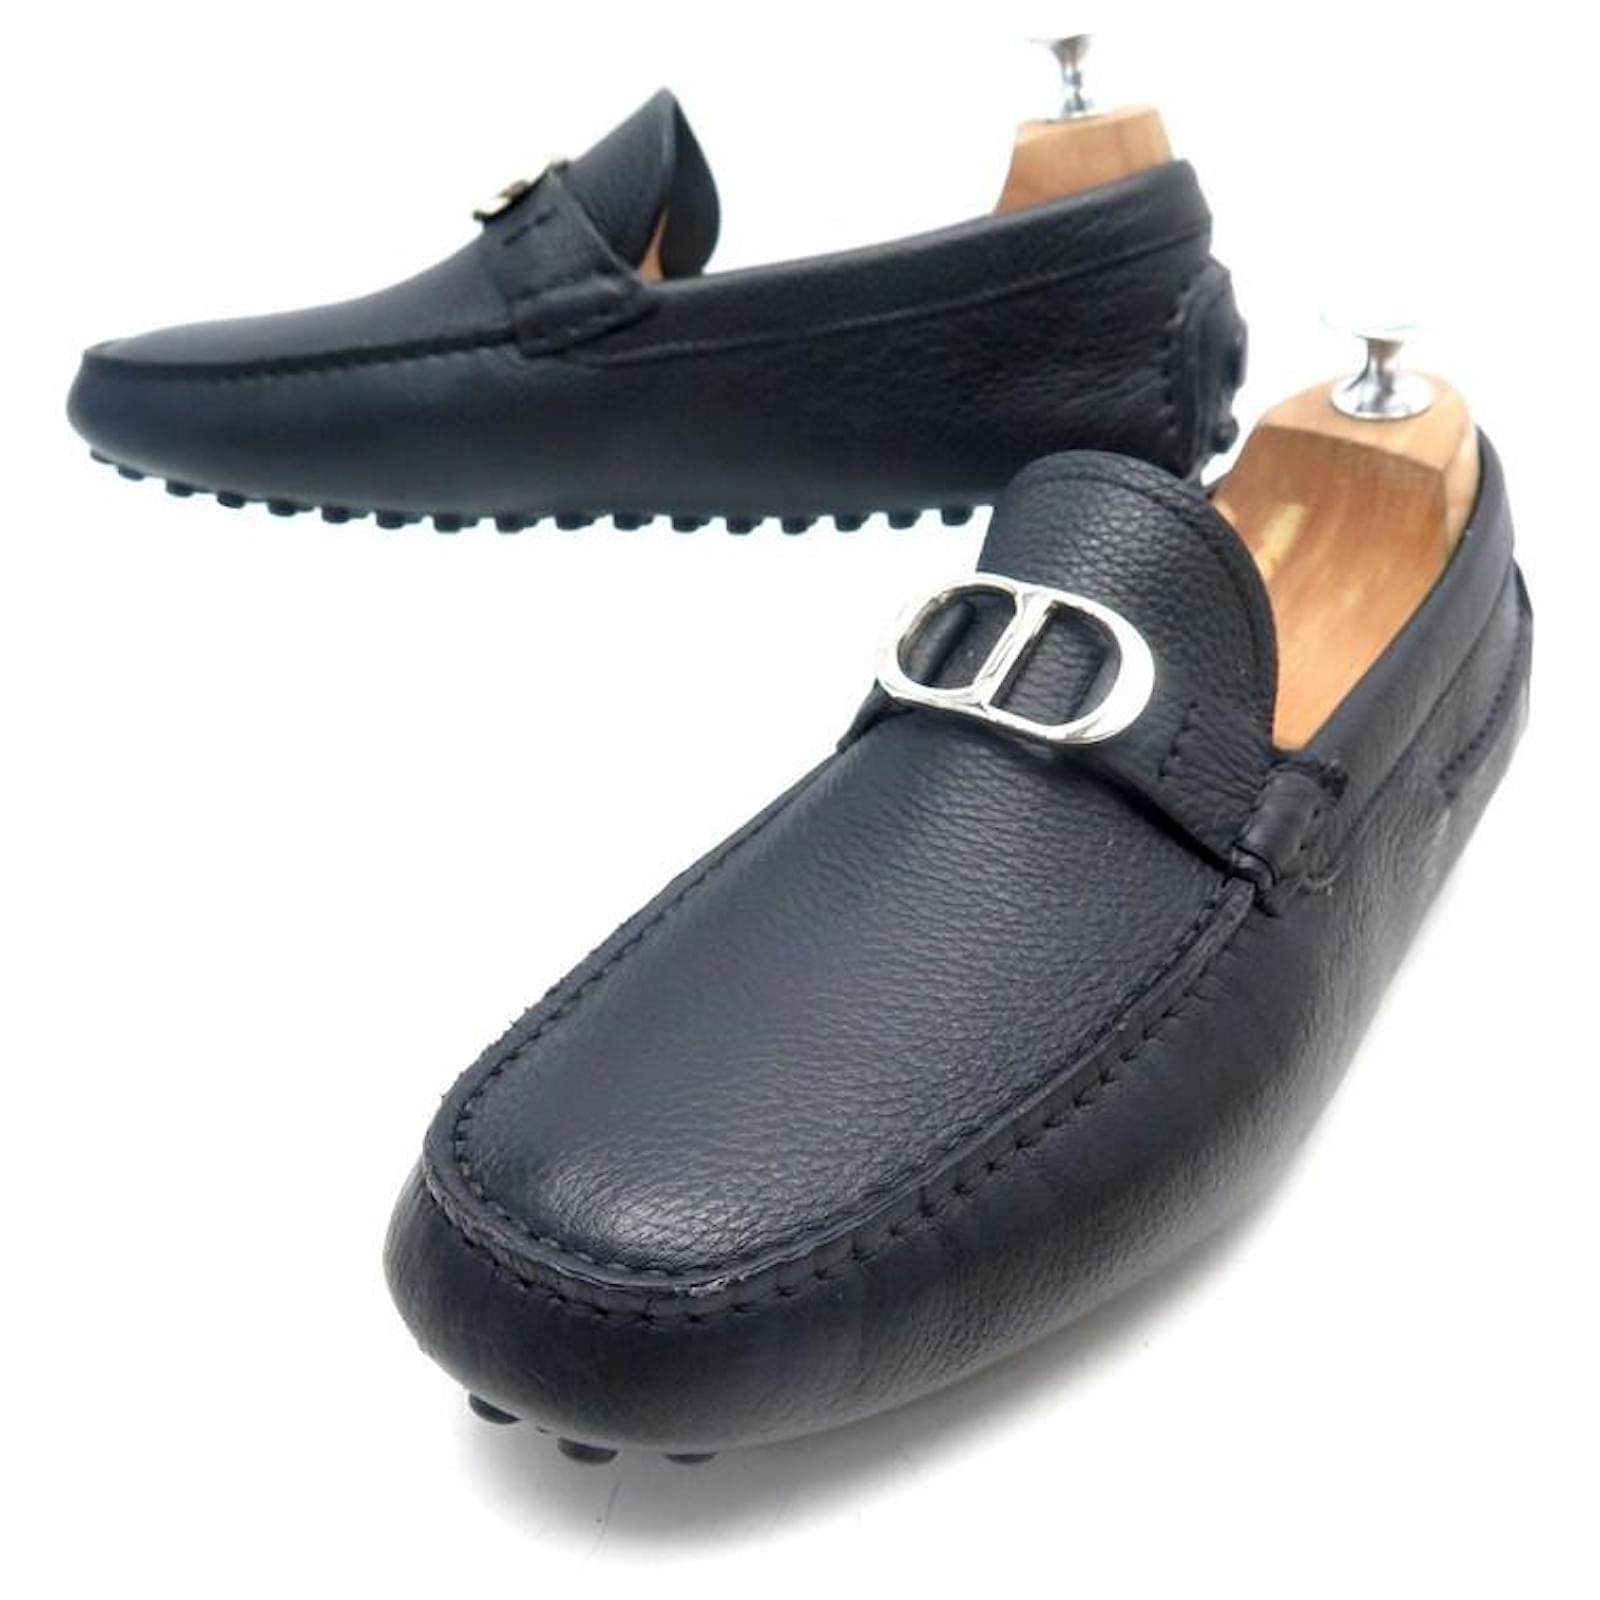 NINE DIOR SHOES INITIAL MOCCASIN 39.5 BLACK GRAINED LEATHER LOAFFERS ...